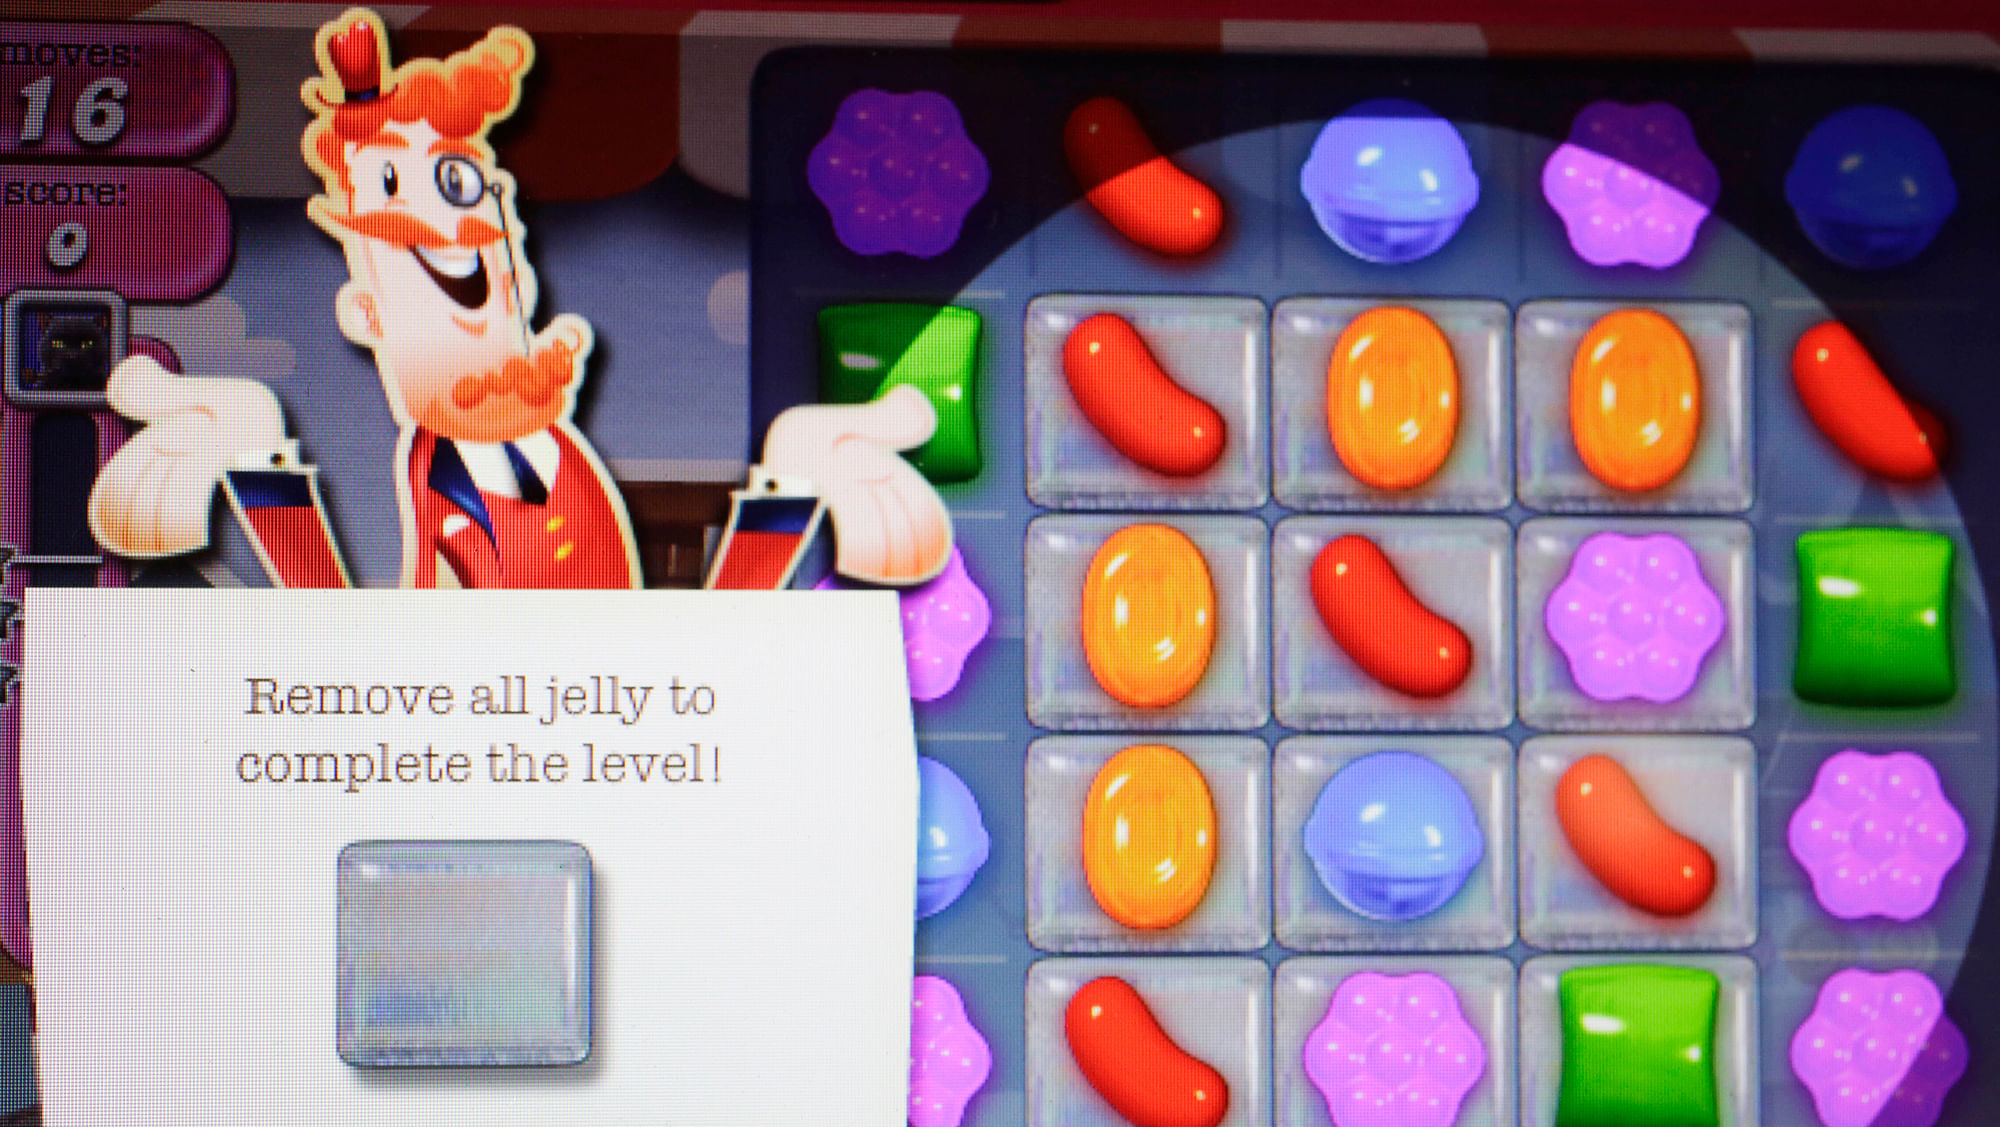 Screen grab from the online game “Candy Crush Saga”. (Photo: AP)